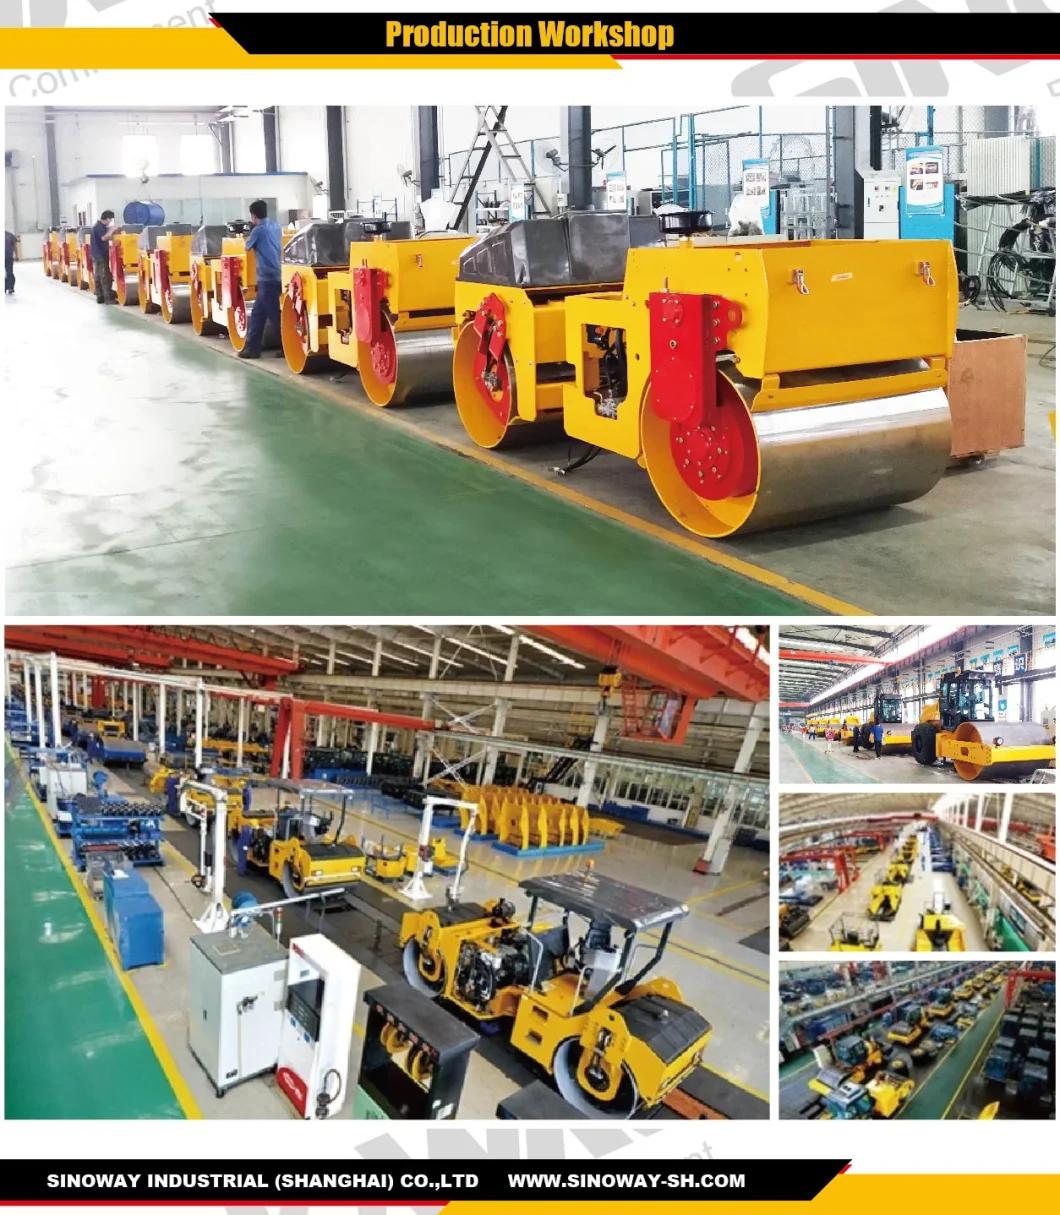 China Vibratory Combination Roller Hydraulic Asphalt Road Roller for Road Construction